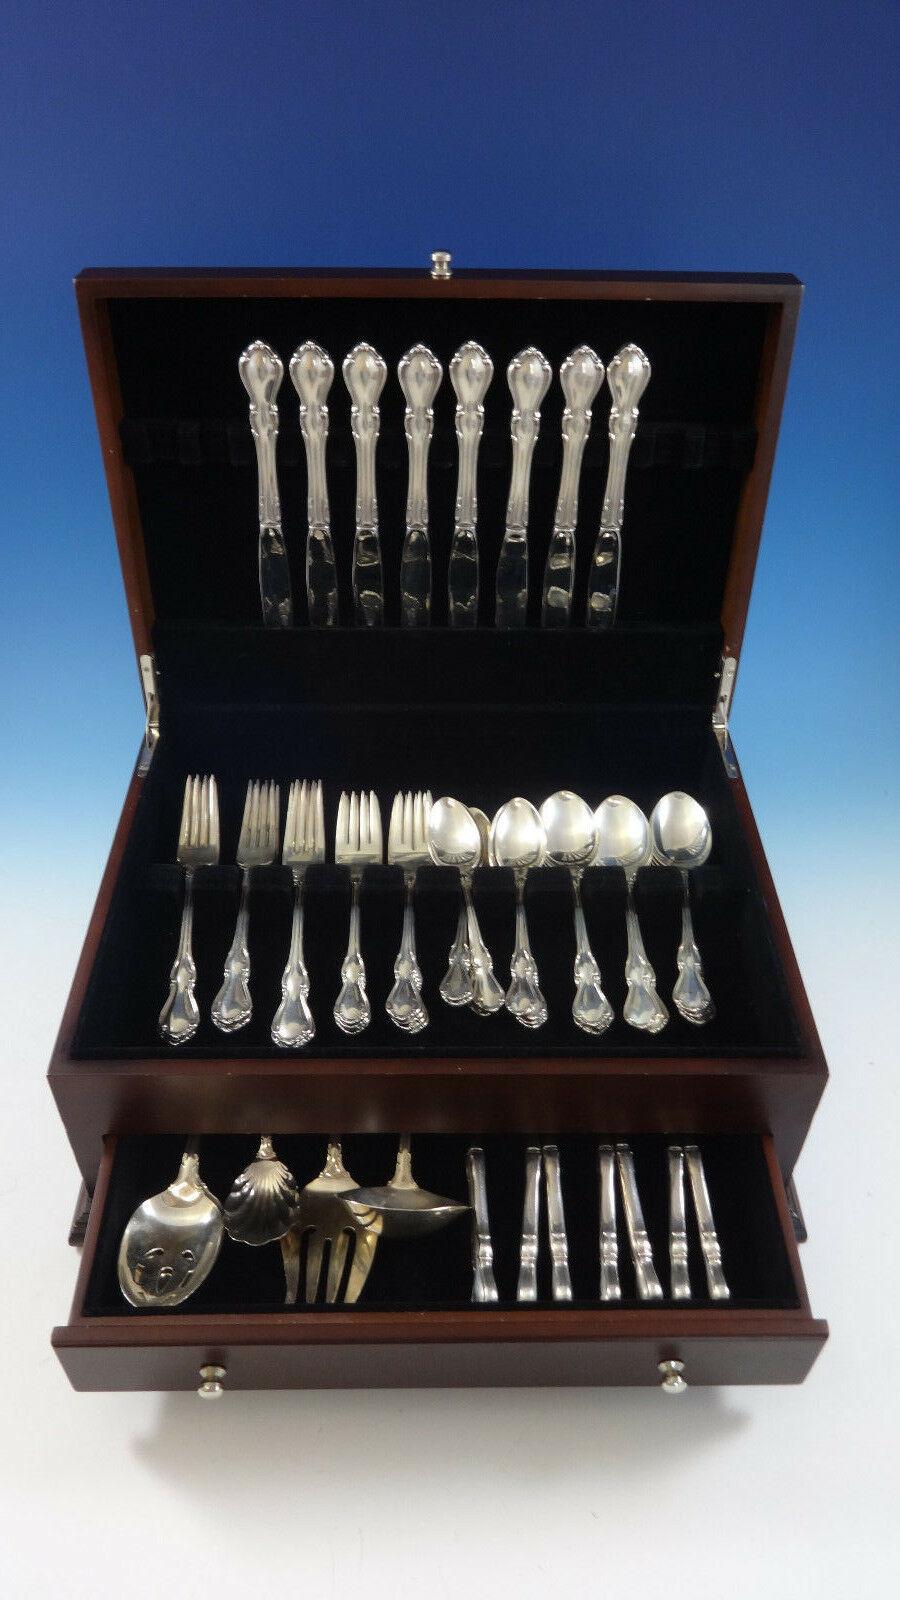 Beautiful Hampton Court by Reed & Barton sterling silver Flatware set - 54 pieces. This set includes:

8 knives, 9 1/8